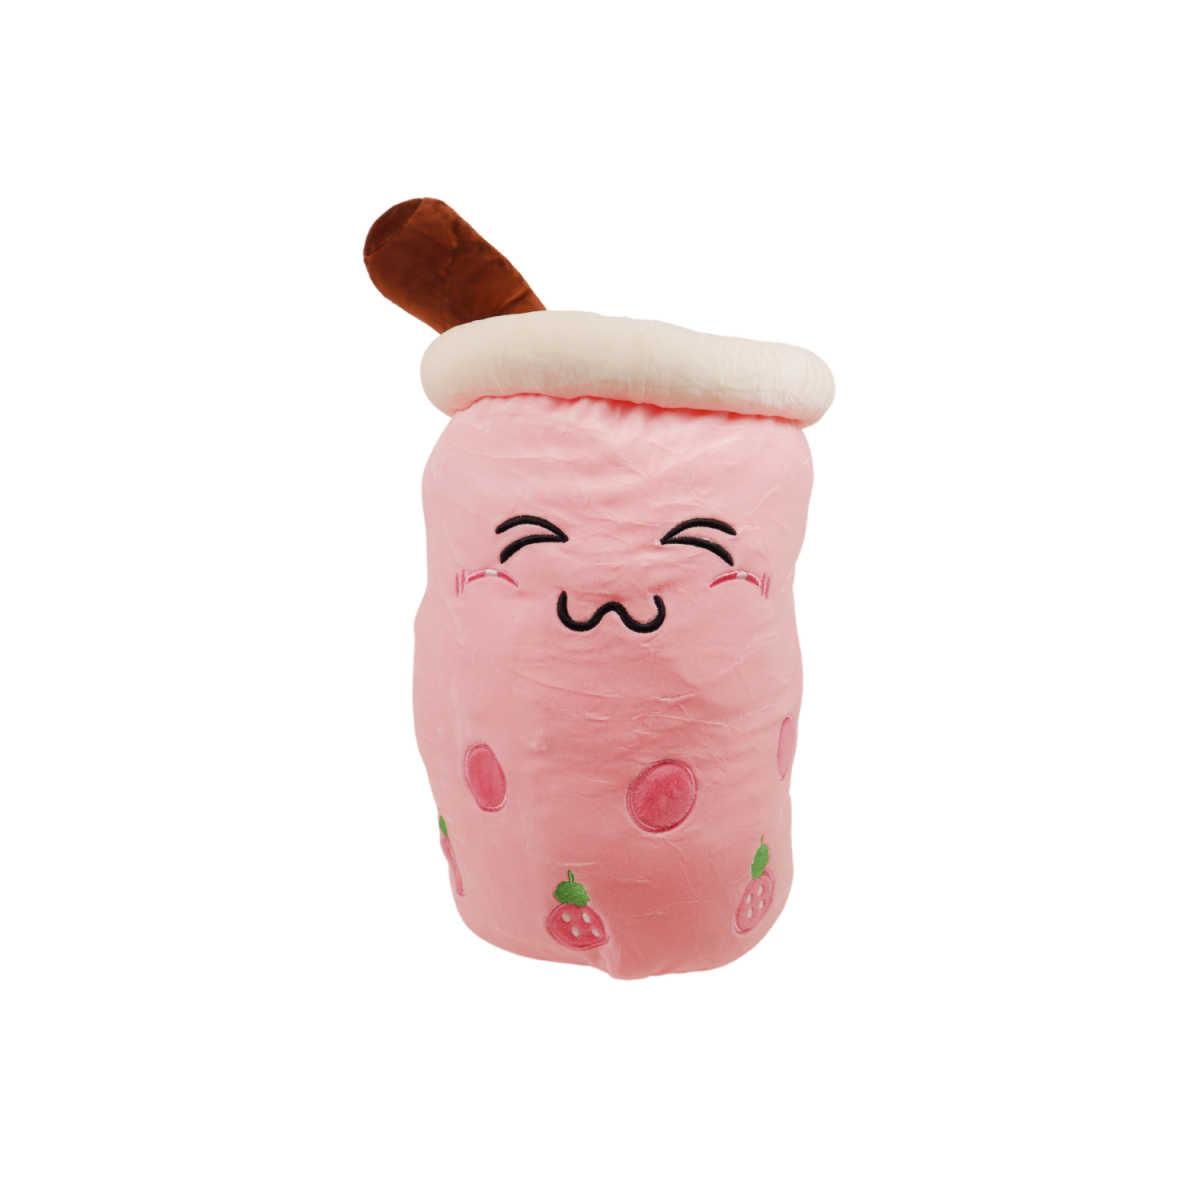 Boba Tea "L" Size Strawberry Plushie Toy (Closed Eyes) - 20 Inches Tall/ 10 Inches Wide-Plushie-Zobie Productions-Zobie Productions